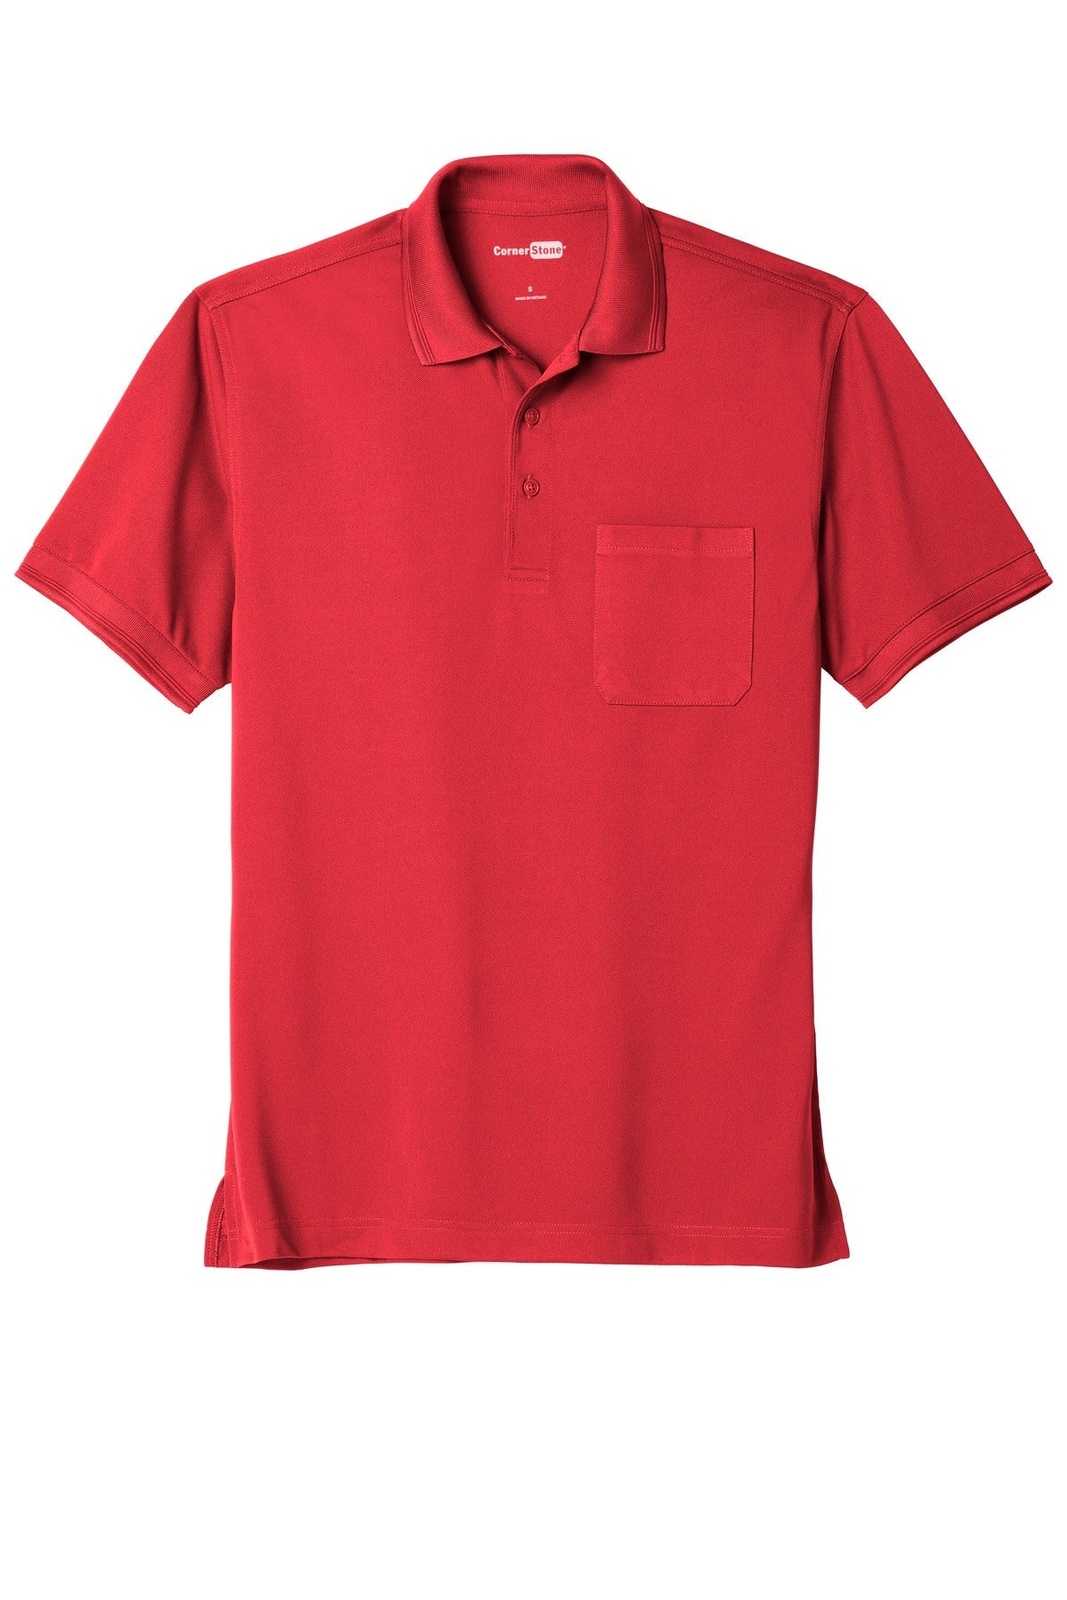 CornerStone CS4020P Industrial Snag-Proof Pique Pocket Polo - Red - HIT a Double - 5